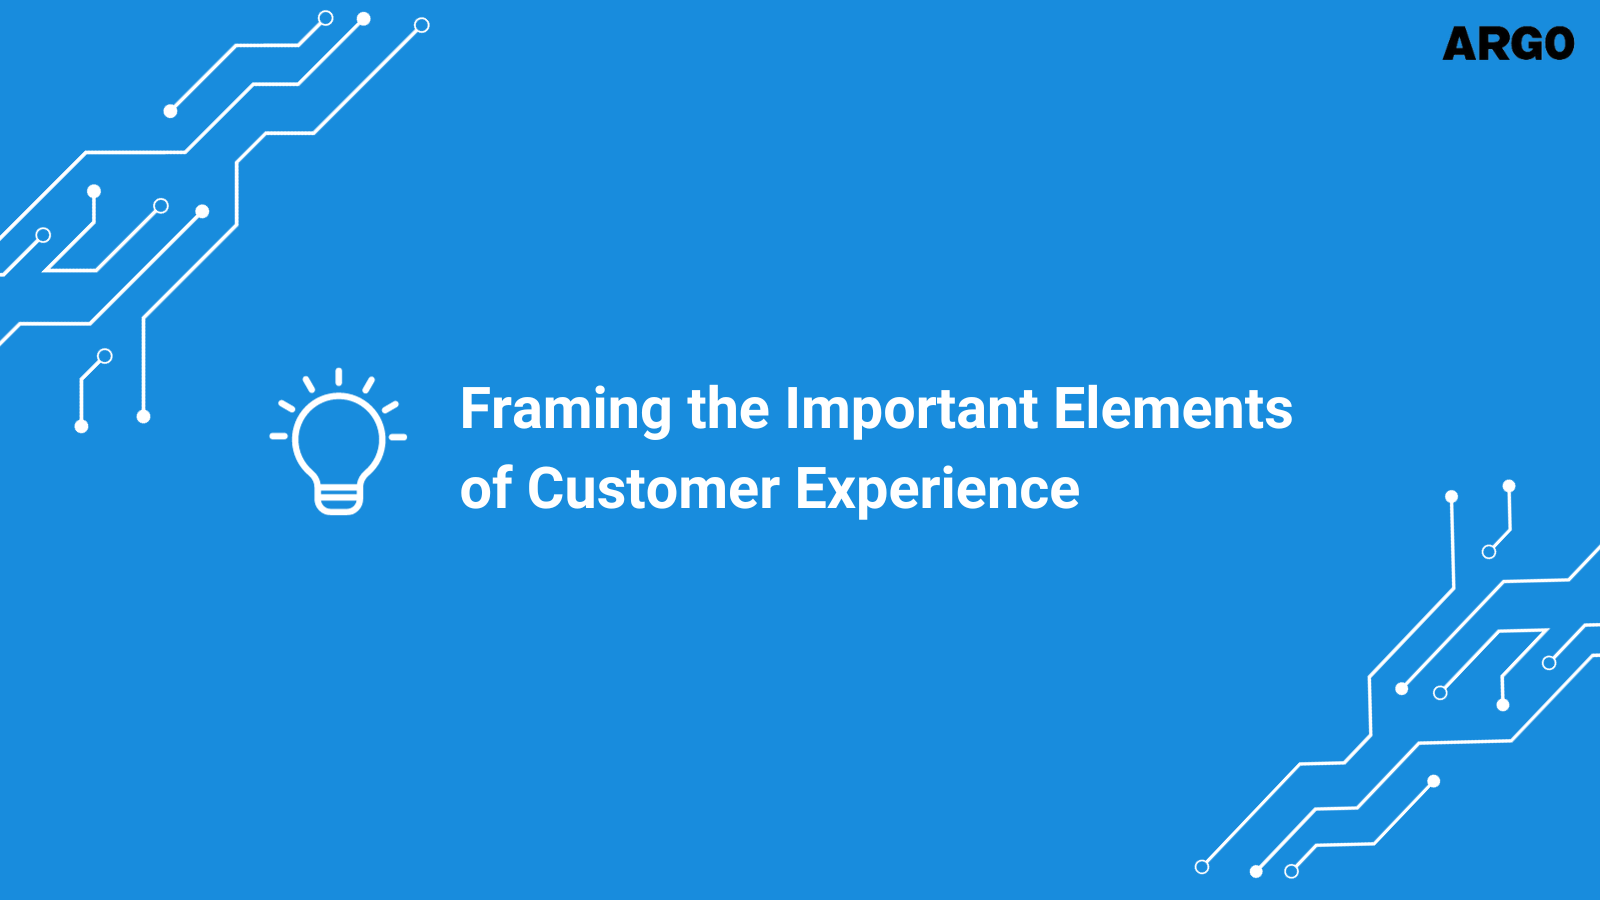 Framing the Important Elements of Customer Experience